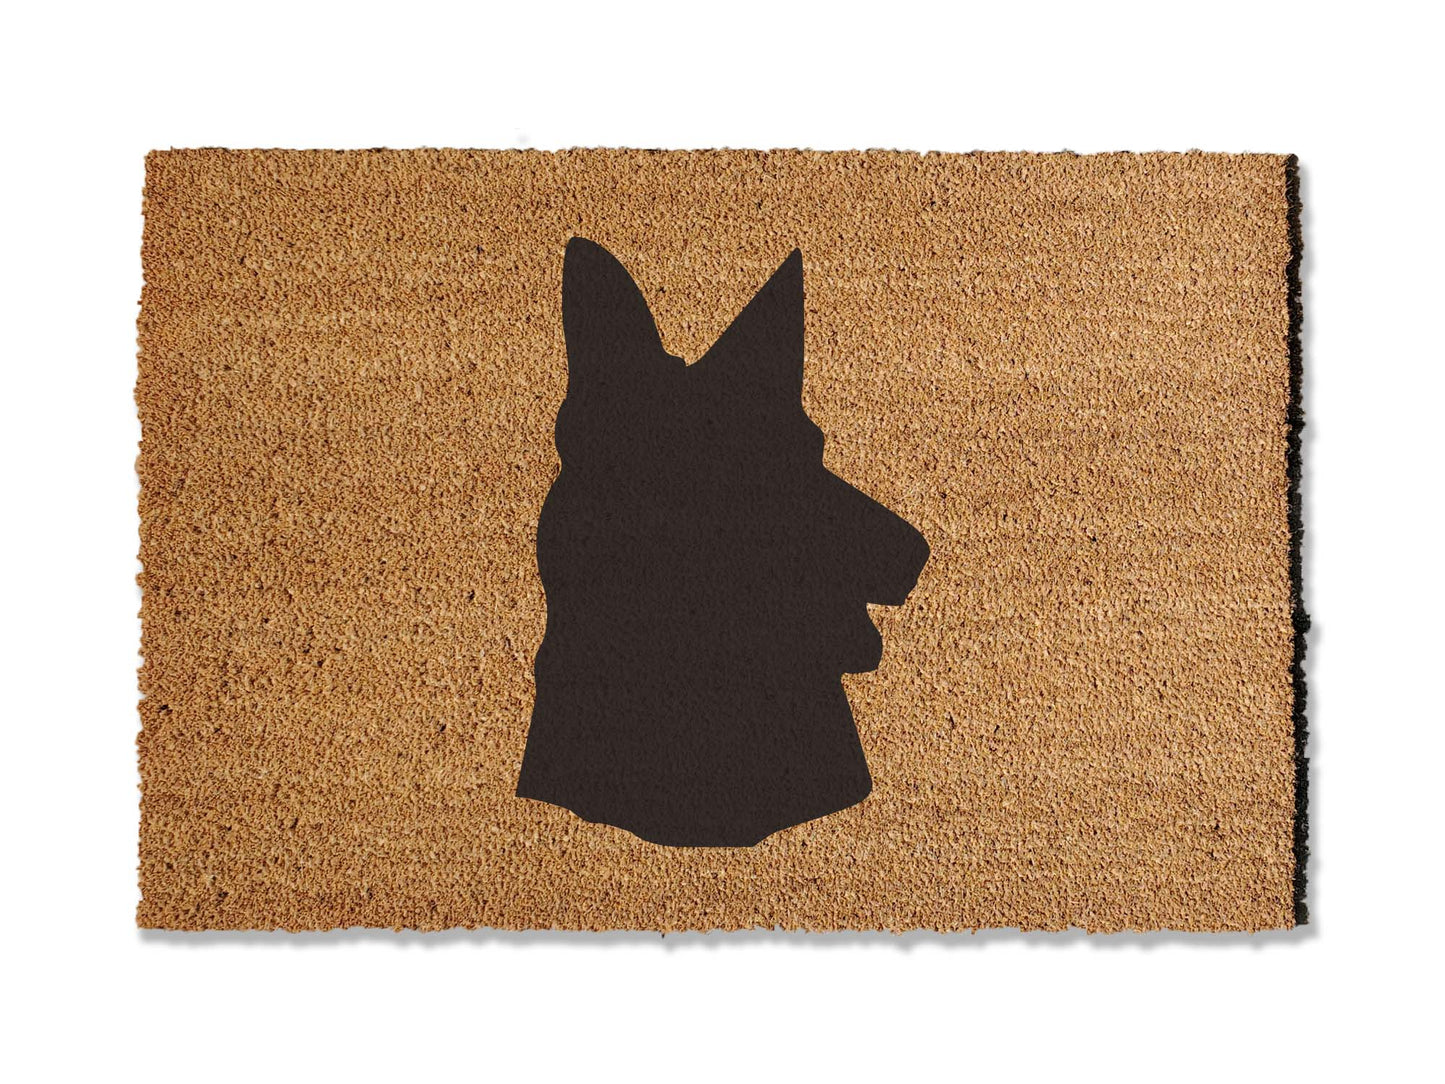 Welcome guests with our coir welcome doormat, featuring a charming German Shepherd design. Available in multiple sizes, this is the perfect gift for German Shepherd lovers, adding a touch of canine charm that effortlessly spruces up your entryway.